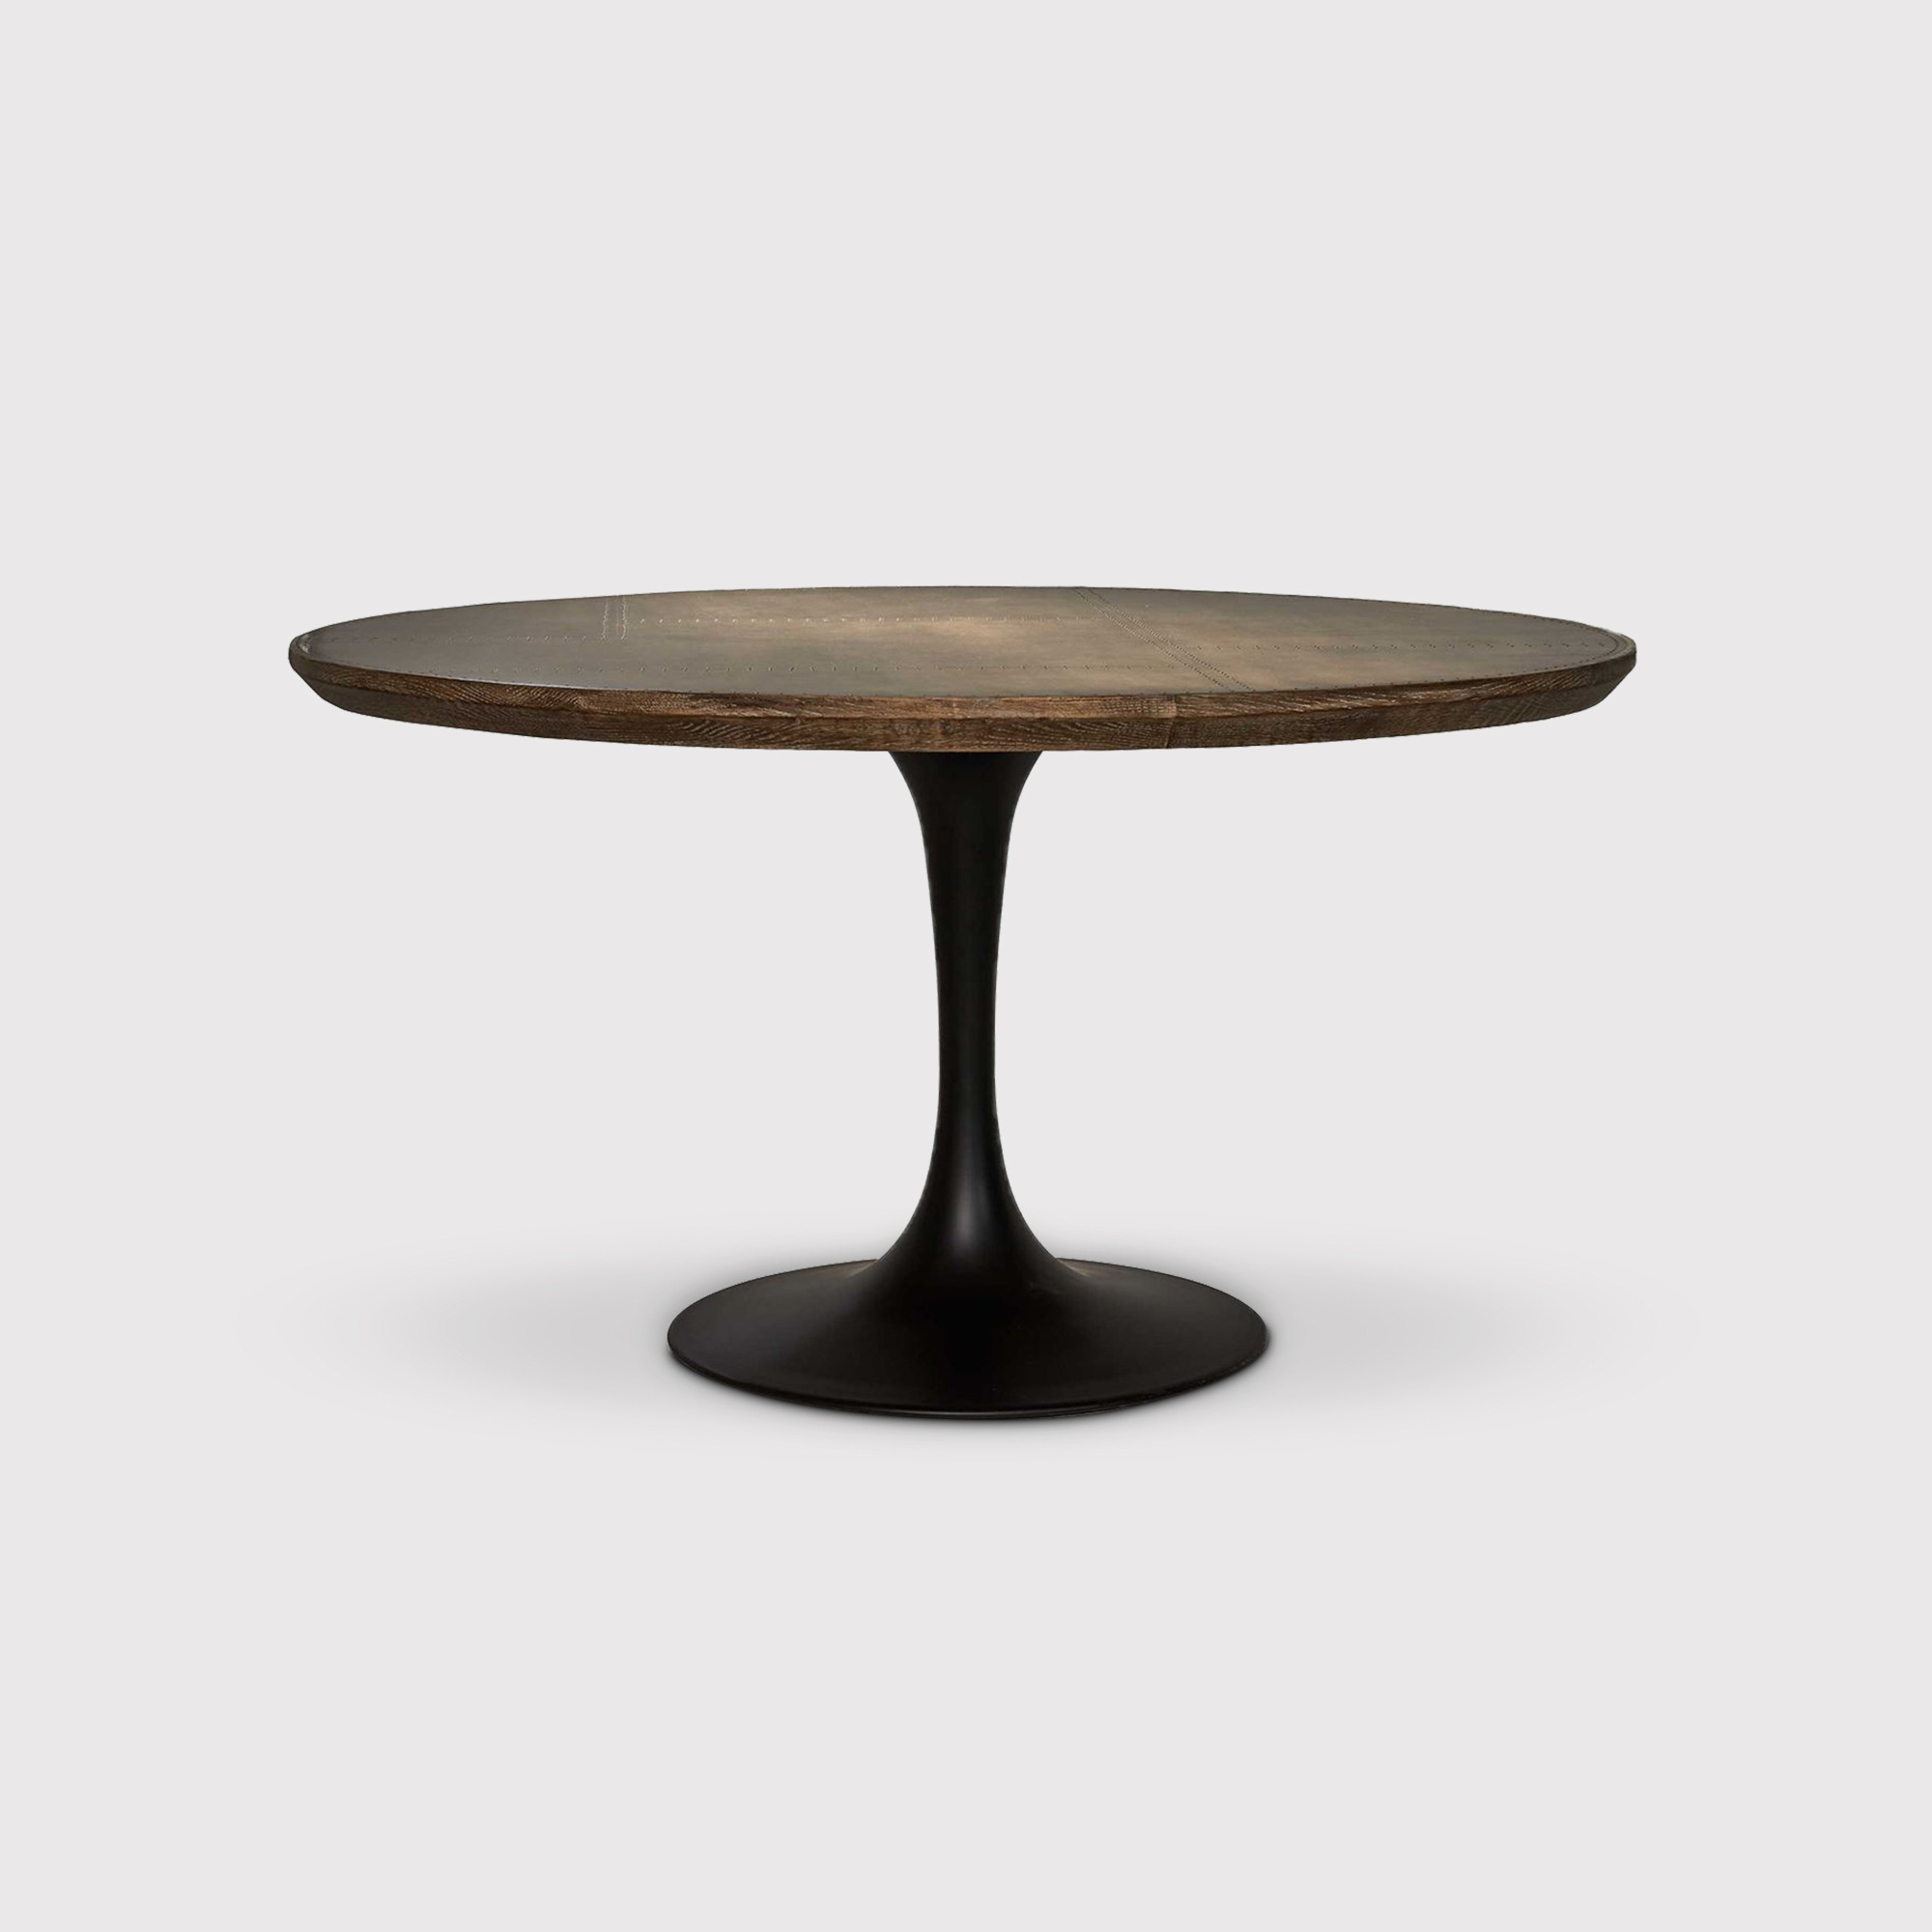 Talula Tulip Dining Table With Brass Top 140x76cm, Brown Metal - Barker & Stonehouse - image 1